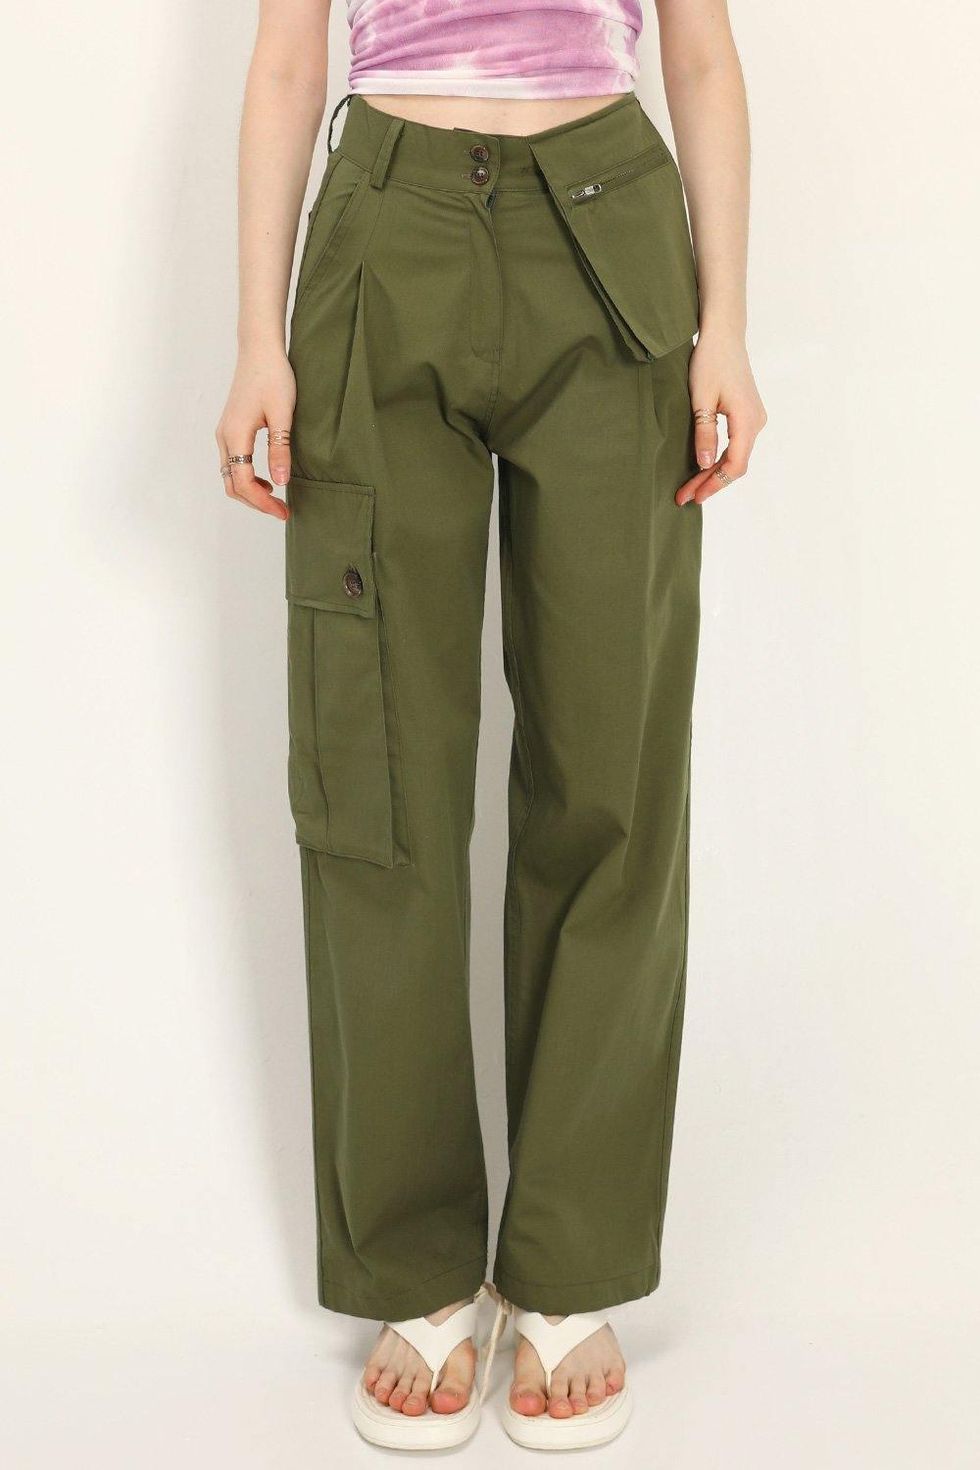 Cargo Pants Are Back in Style - Coveteur: Inside Closets, Fashion ...